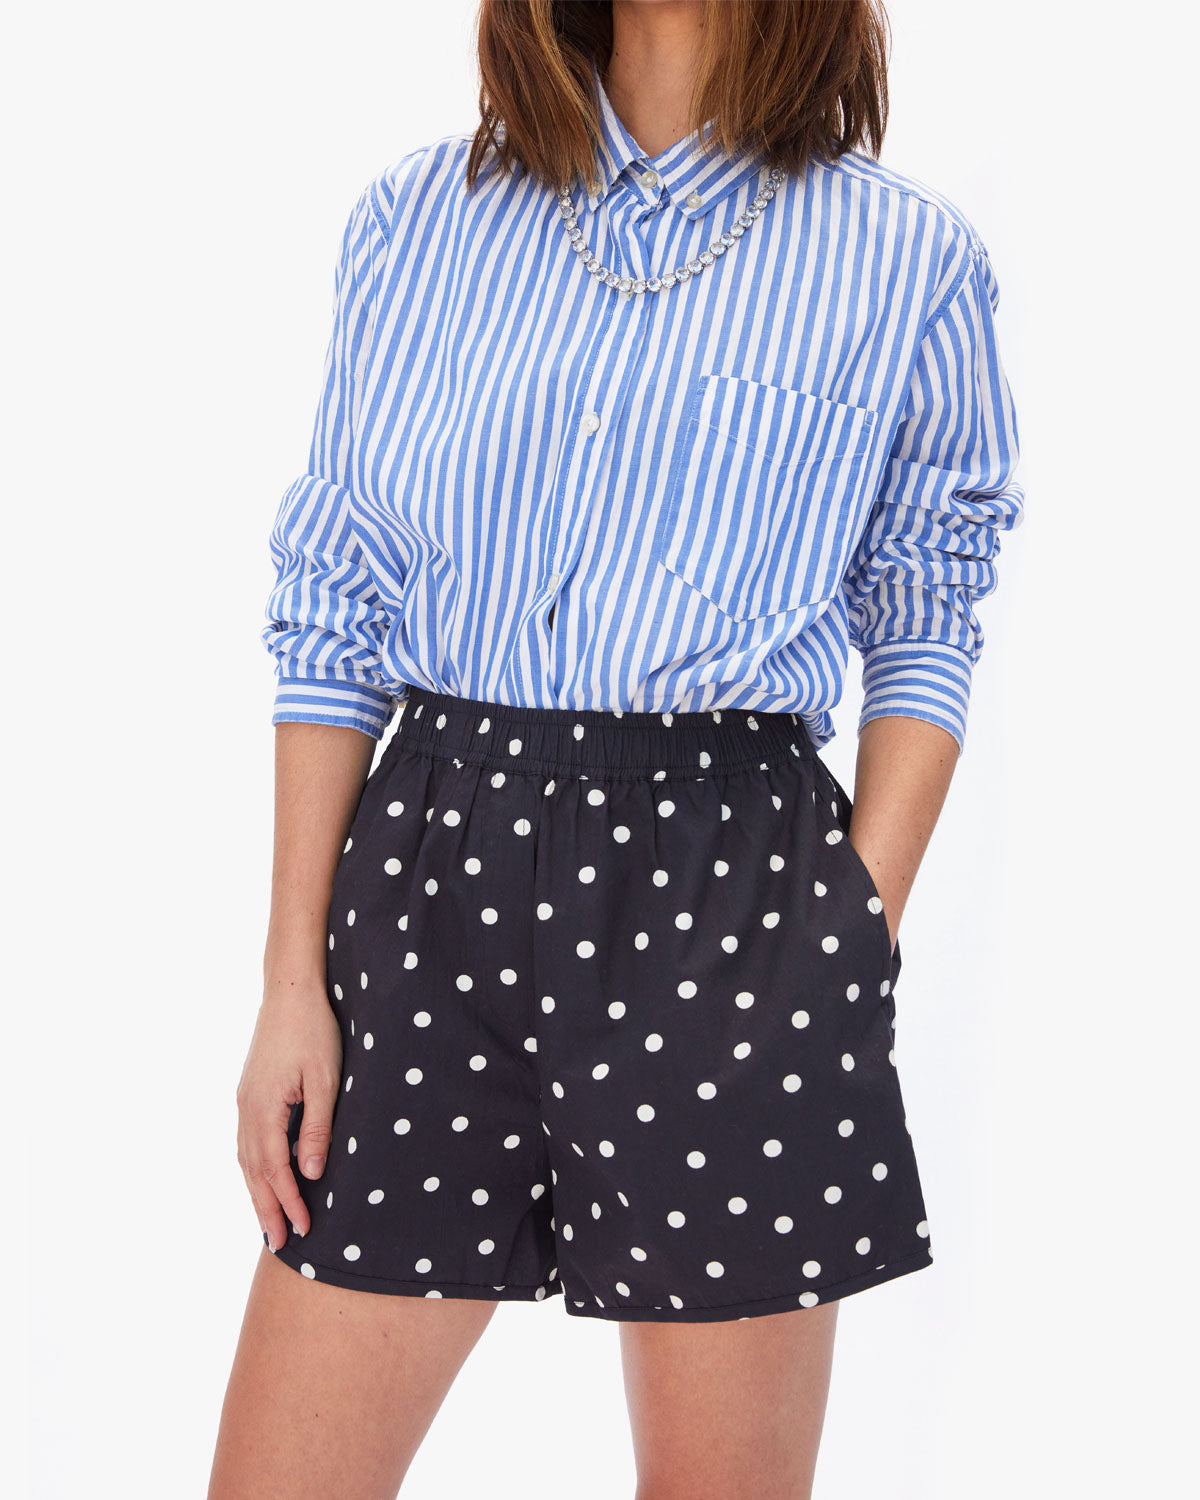 Frannie Wearing the Black and White Polka Dot St. Martin Shorts with a Blue & White Striped Button Down